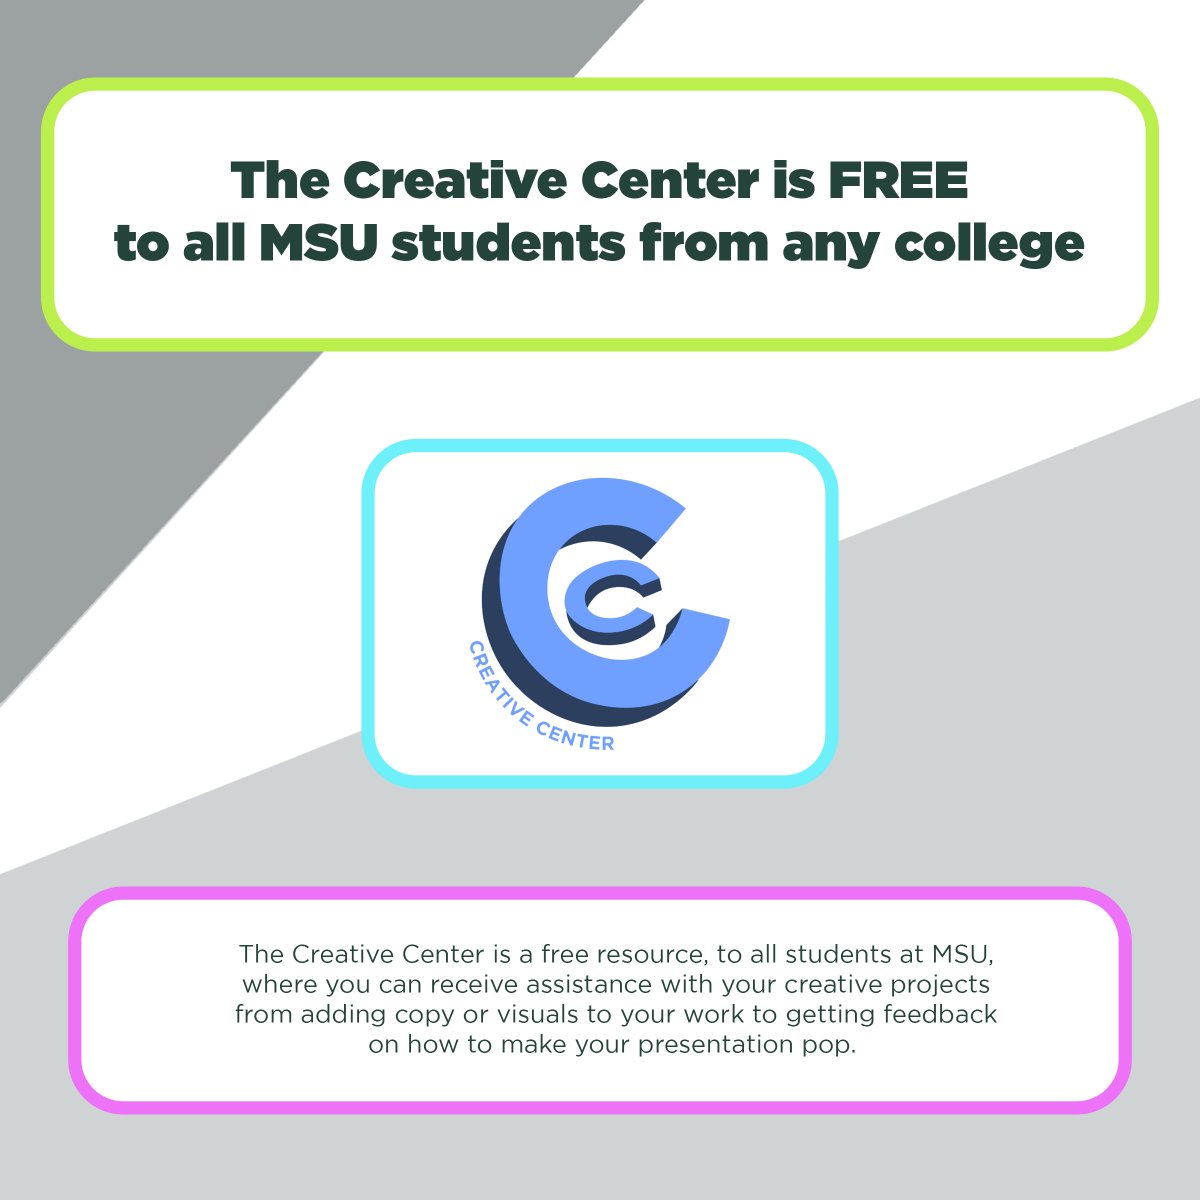 Want to learn how to enhance your creative abilities? Check out MSU's creative center where students provide free services to help their peers with portfolios and projects. Click the link below to learn more. creativecenter.adv.msu.edu/about.html